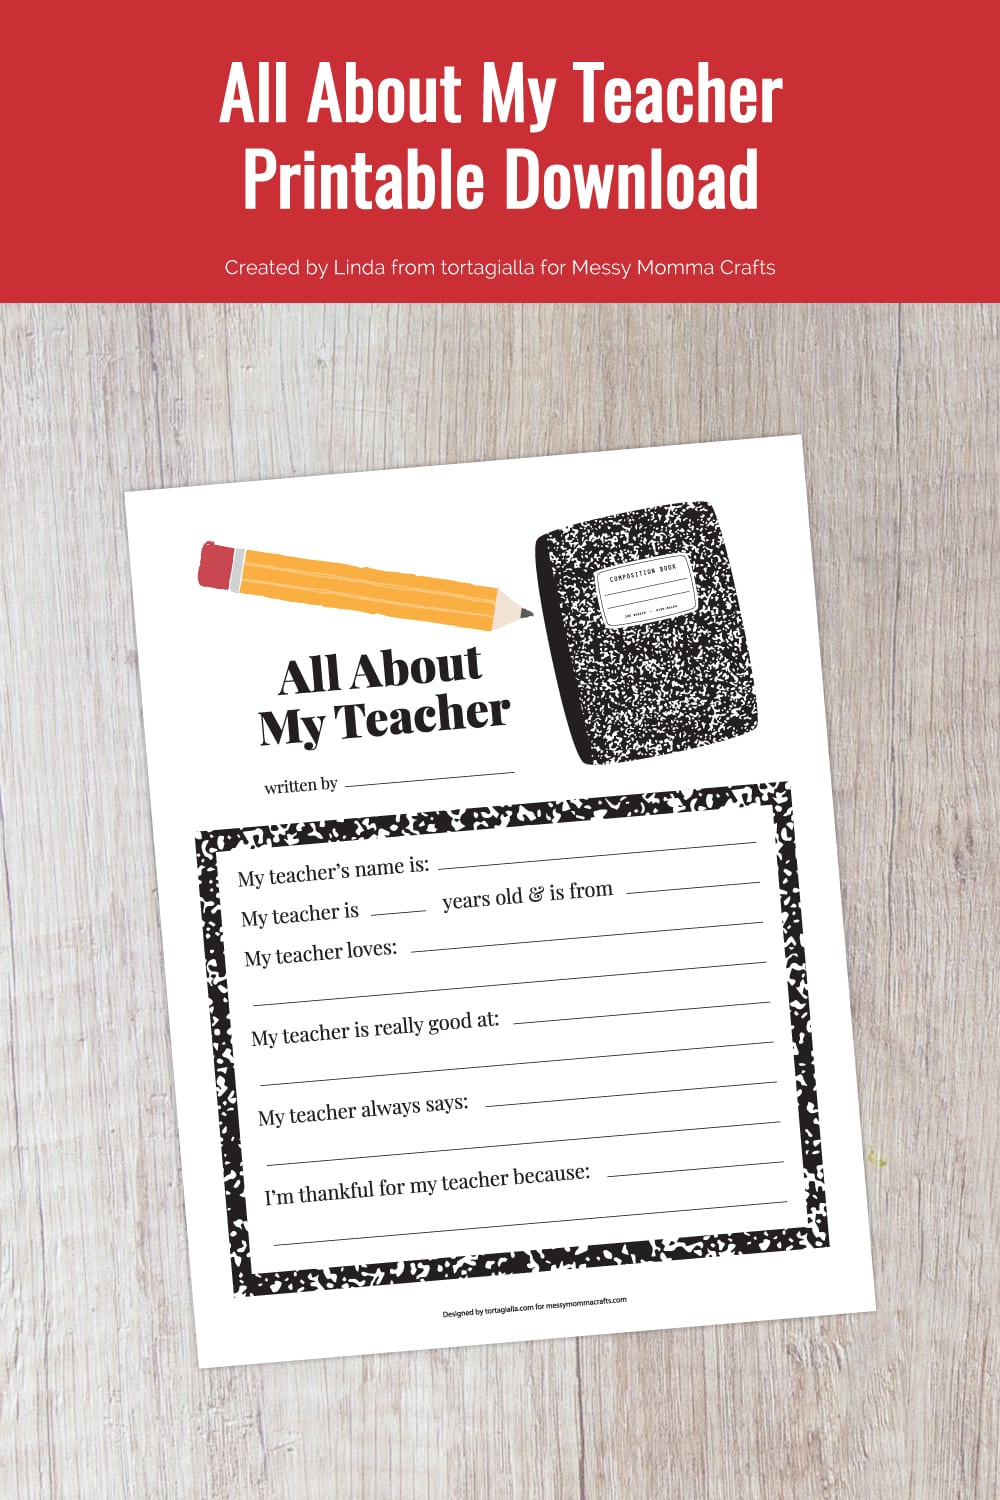 Preview of all about my teacher printable page on light gray wooden background.